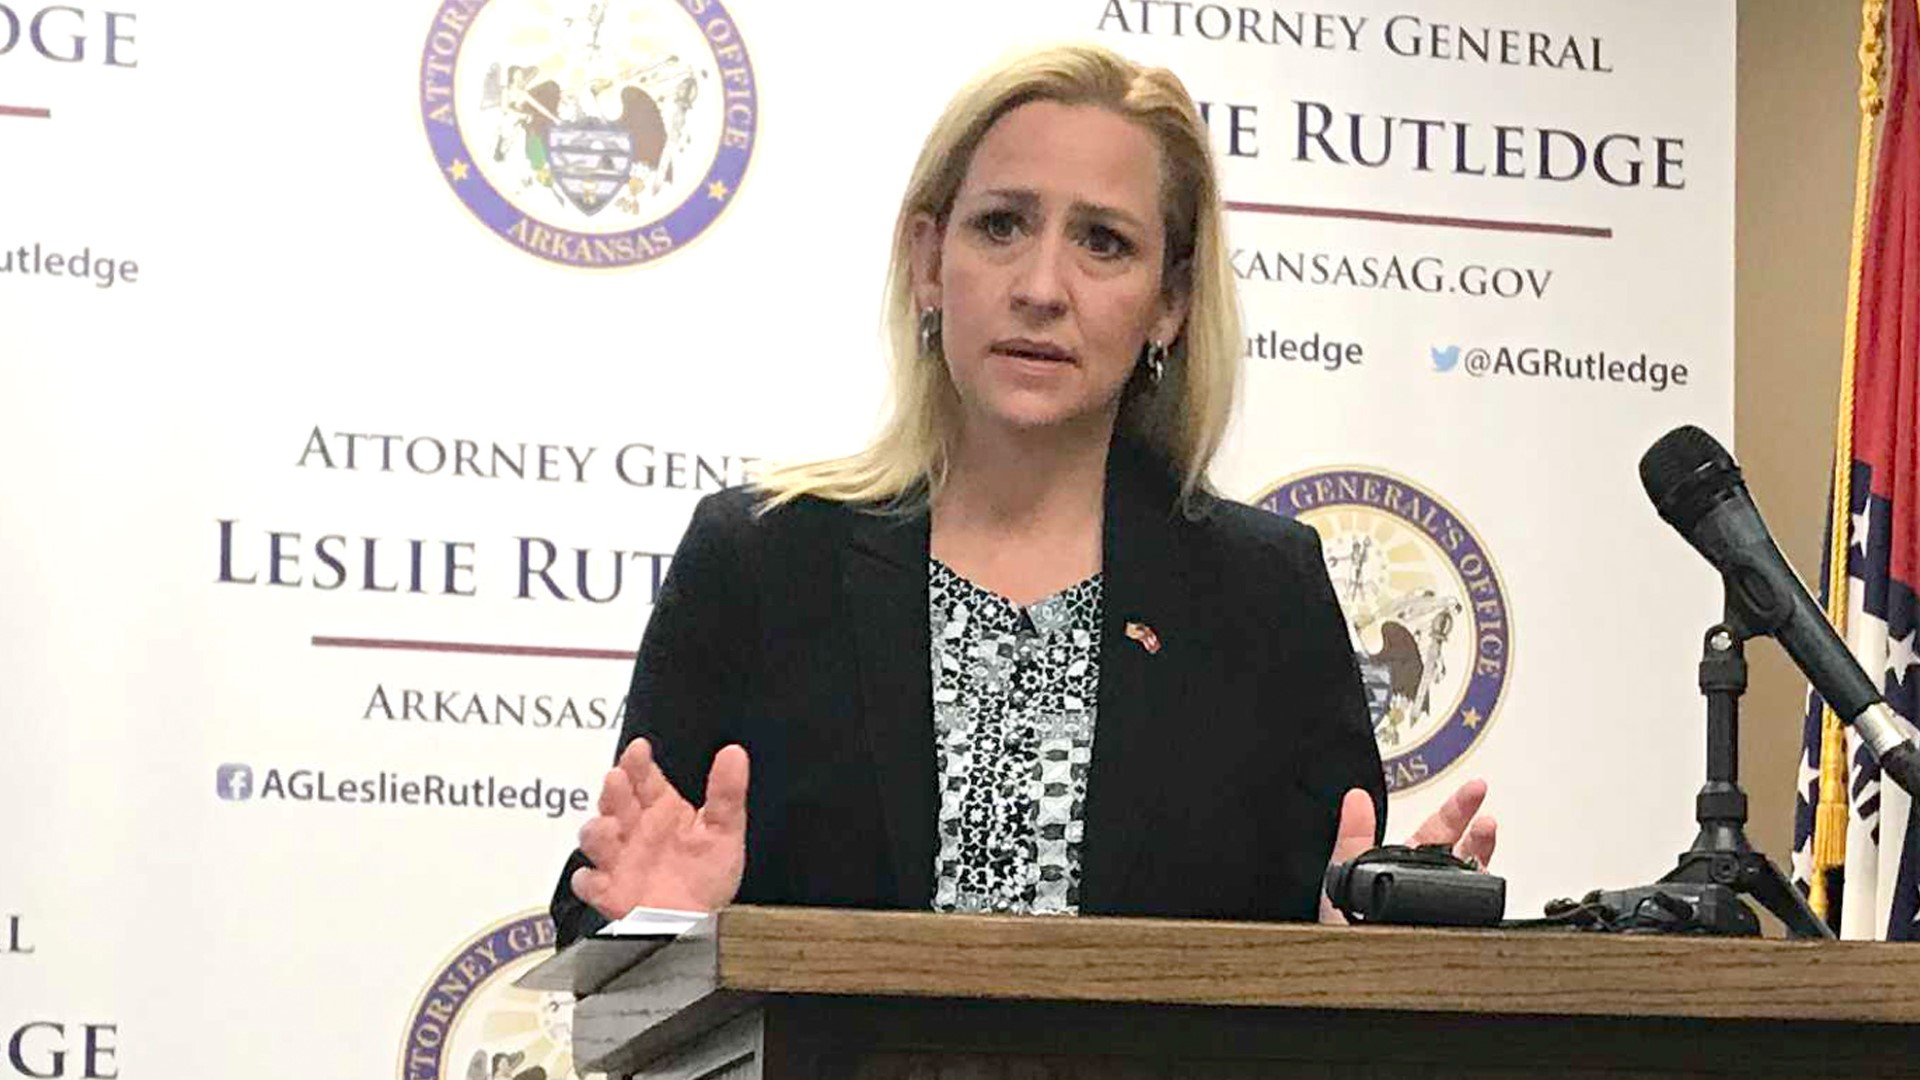 "The Sixth Circuit’s decision is extremely disappointing for Arkansans because it will force them to get the shot or lose their jobs," AG Leslie Rutledge said.